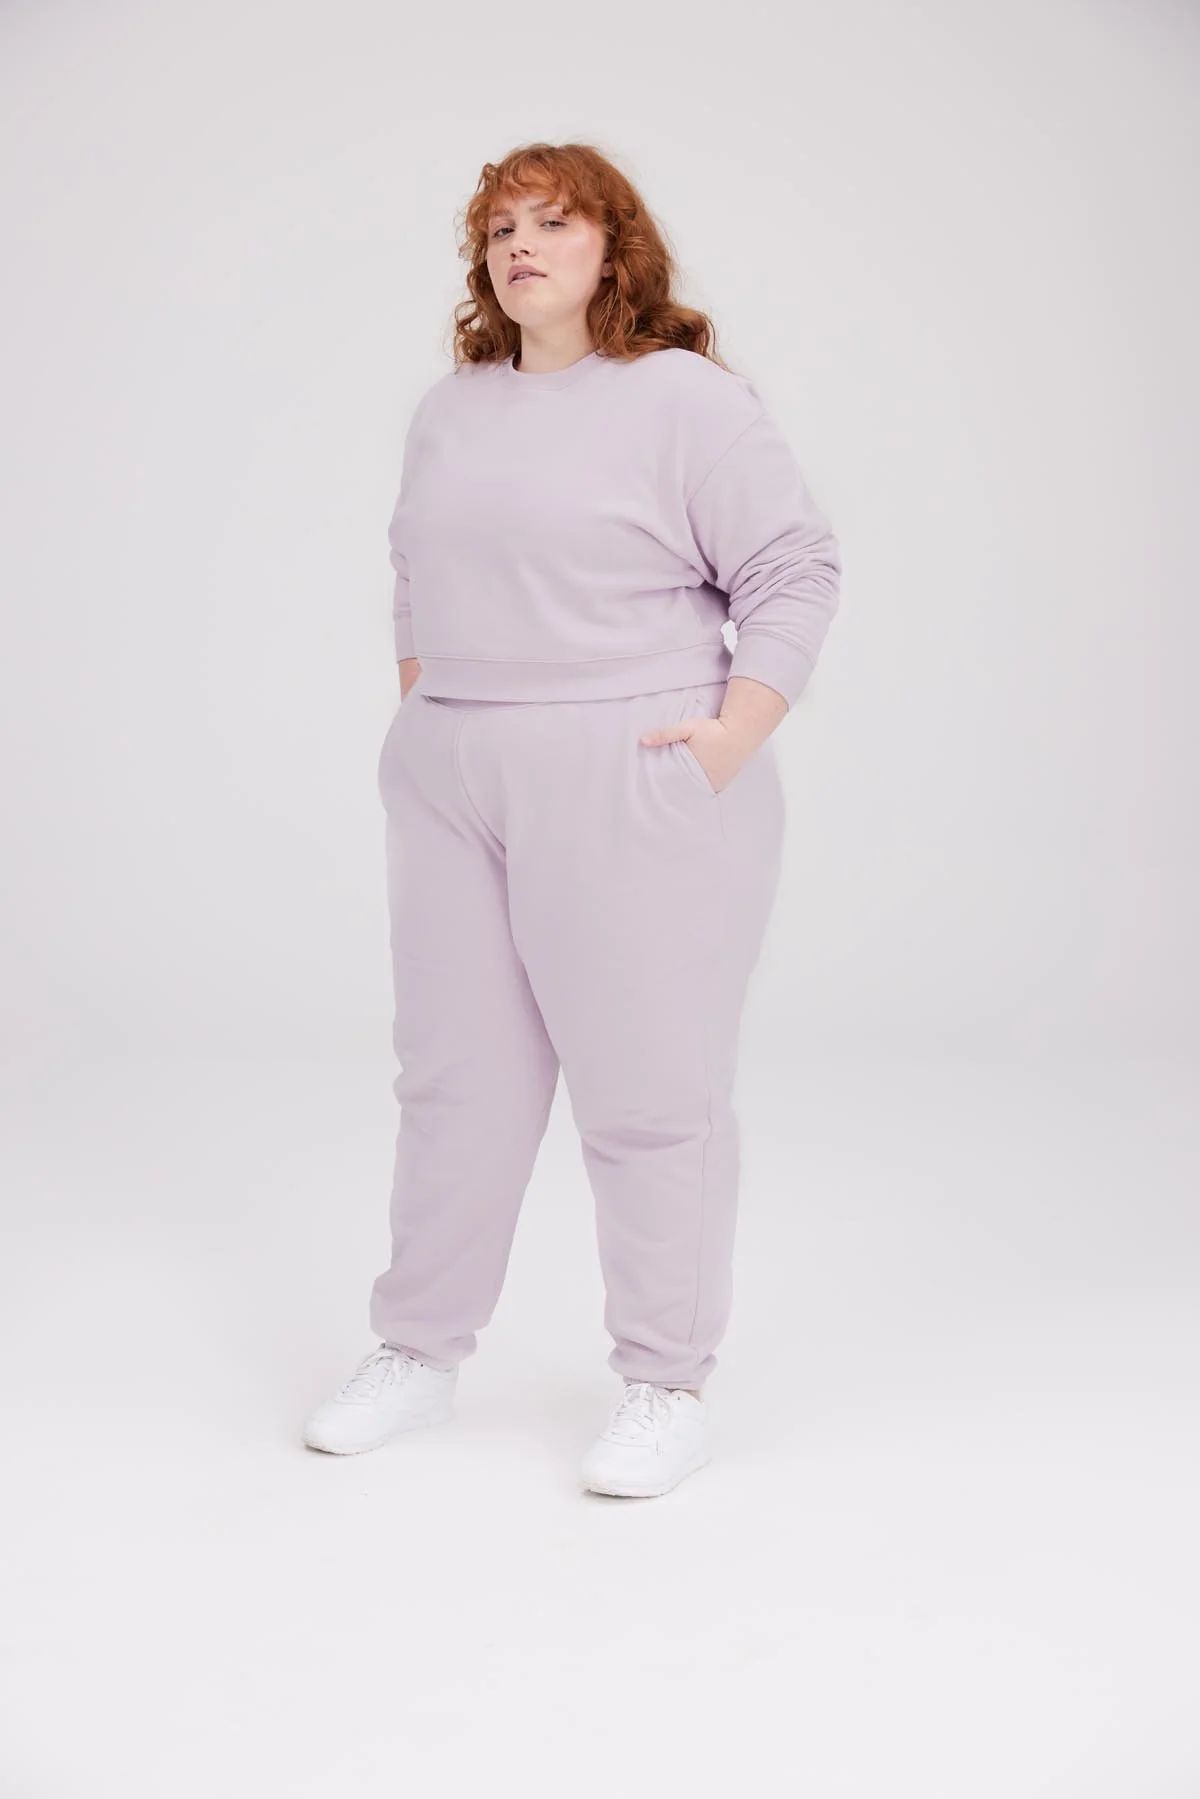 Orchid 50/50 Classic Jogger | Girlfriend Collective